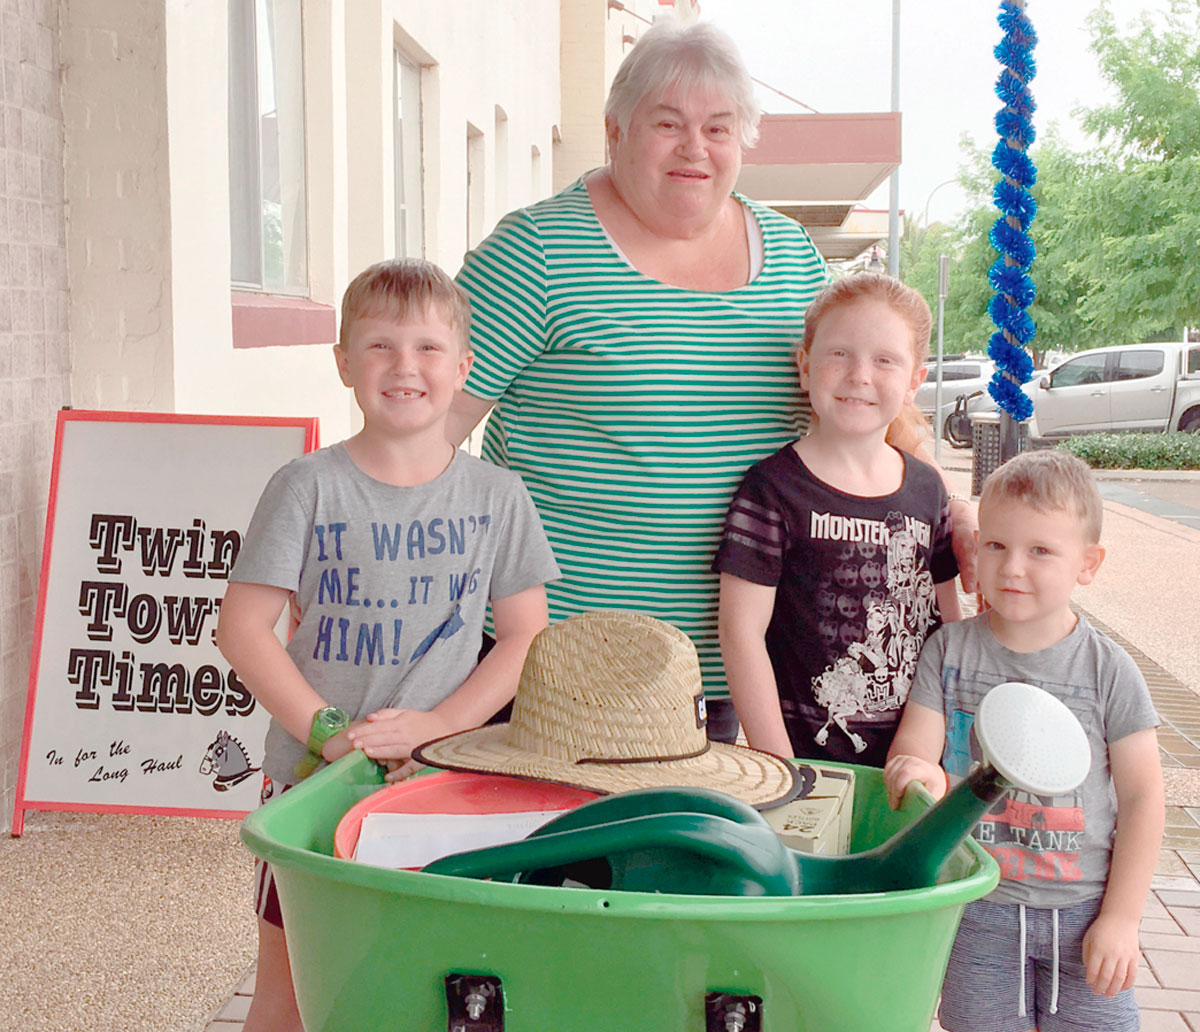 Wheelbarrow For Hockings – The Times Christmas Competition Is Just The Beginning